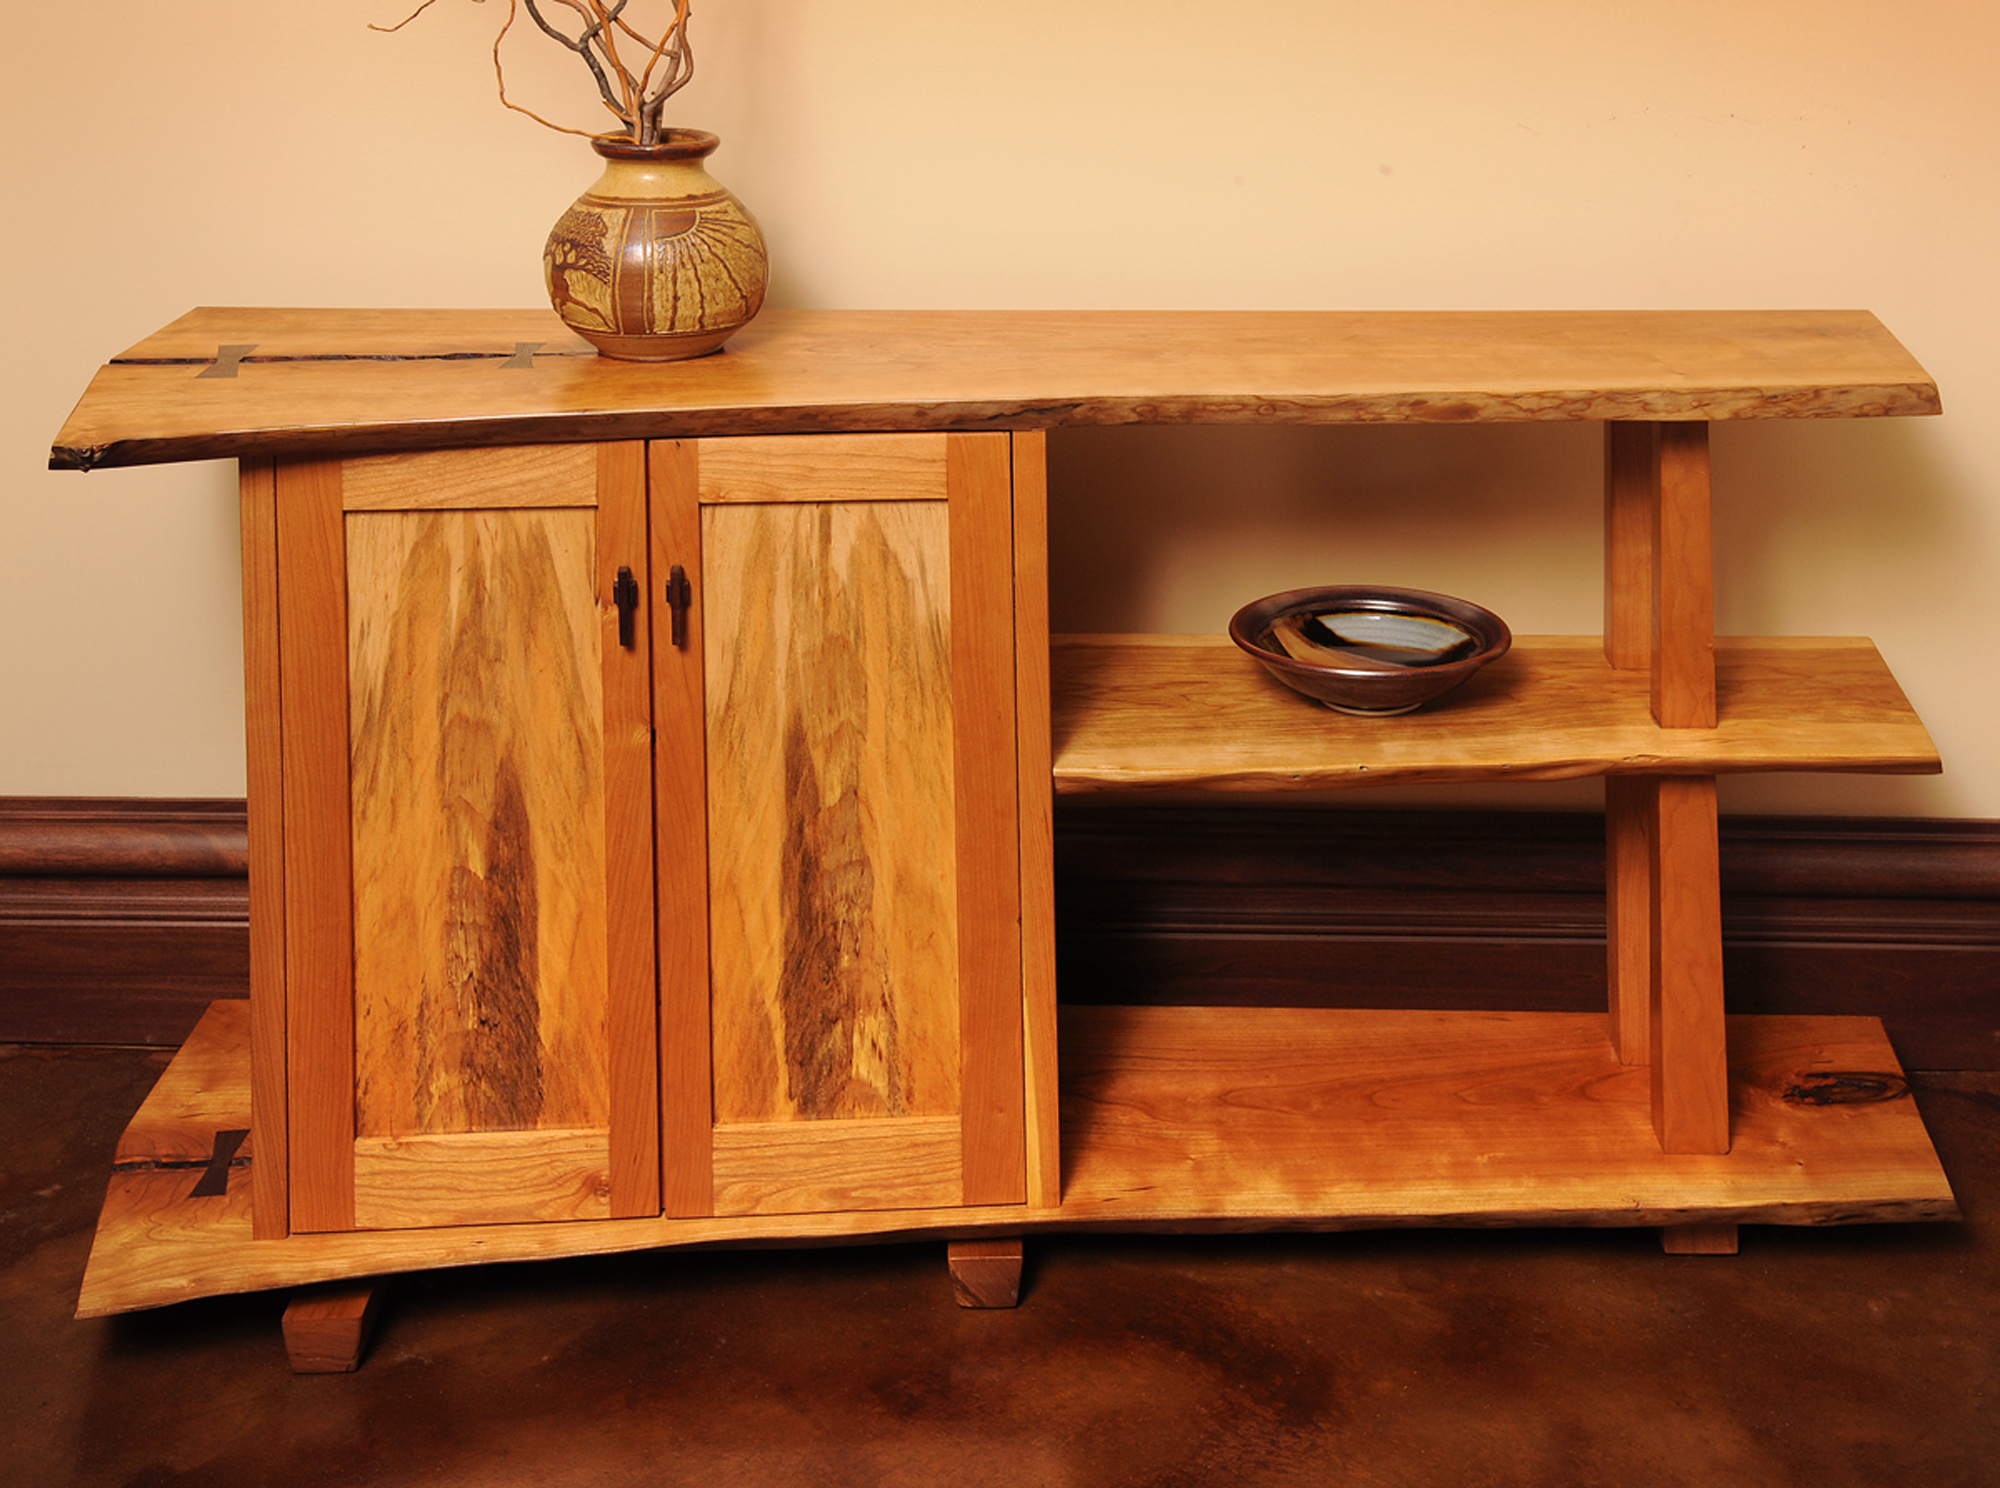 John Sterling handcrafted furniture and accessories.